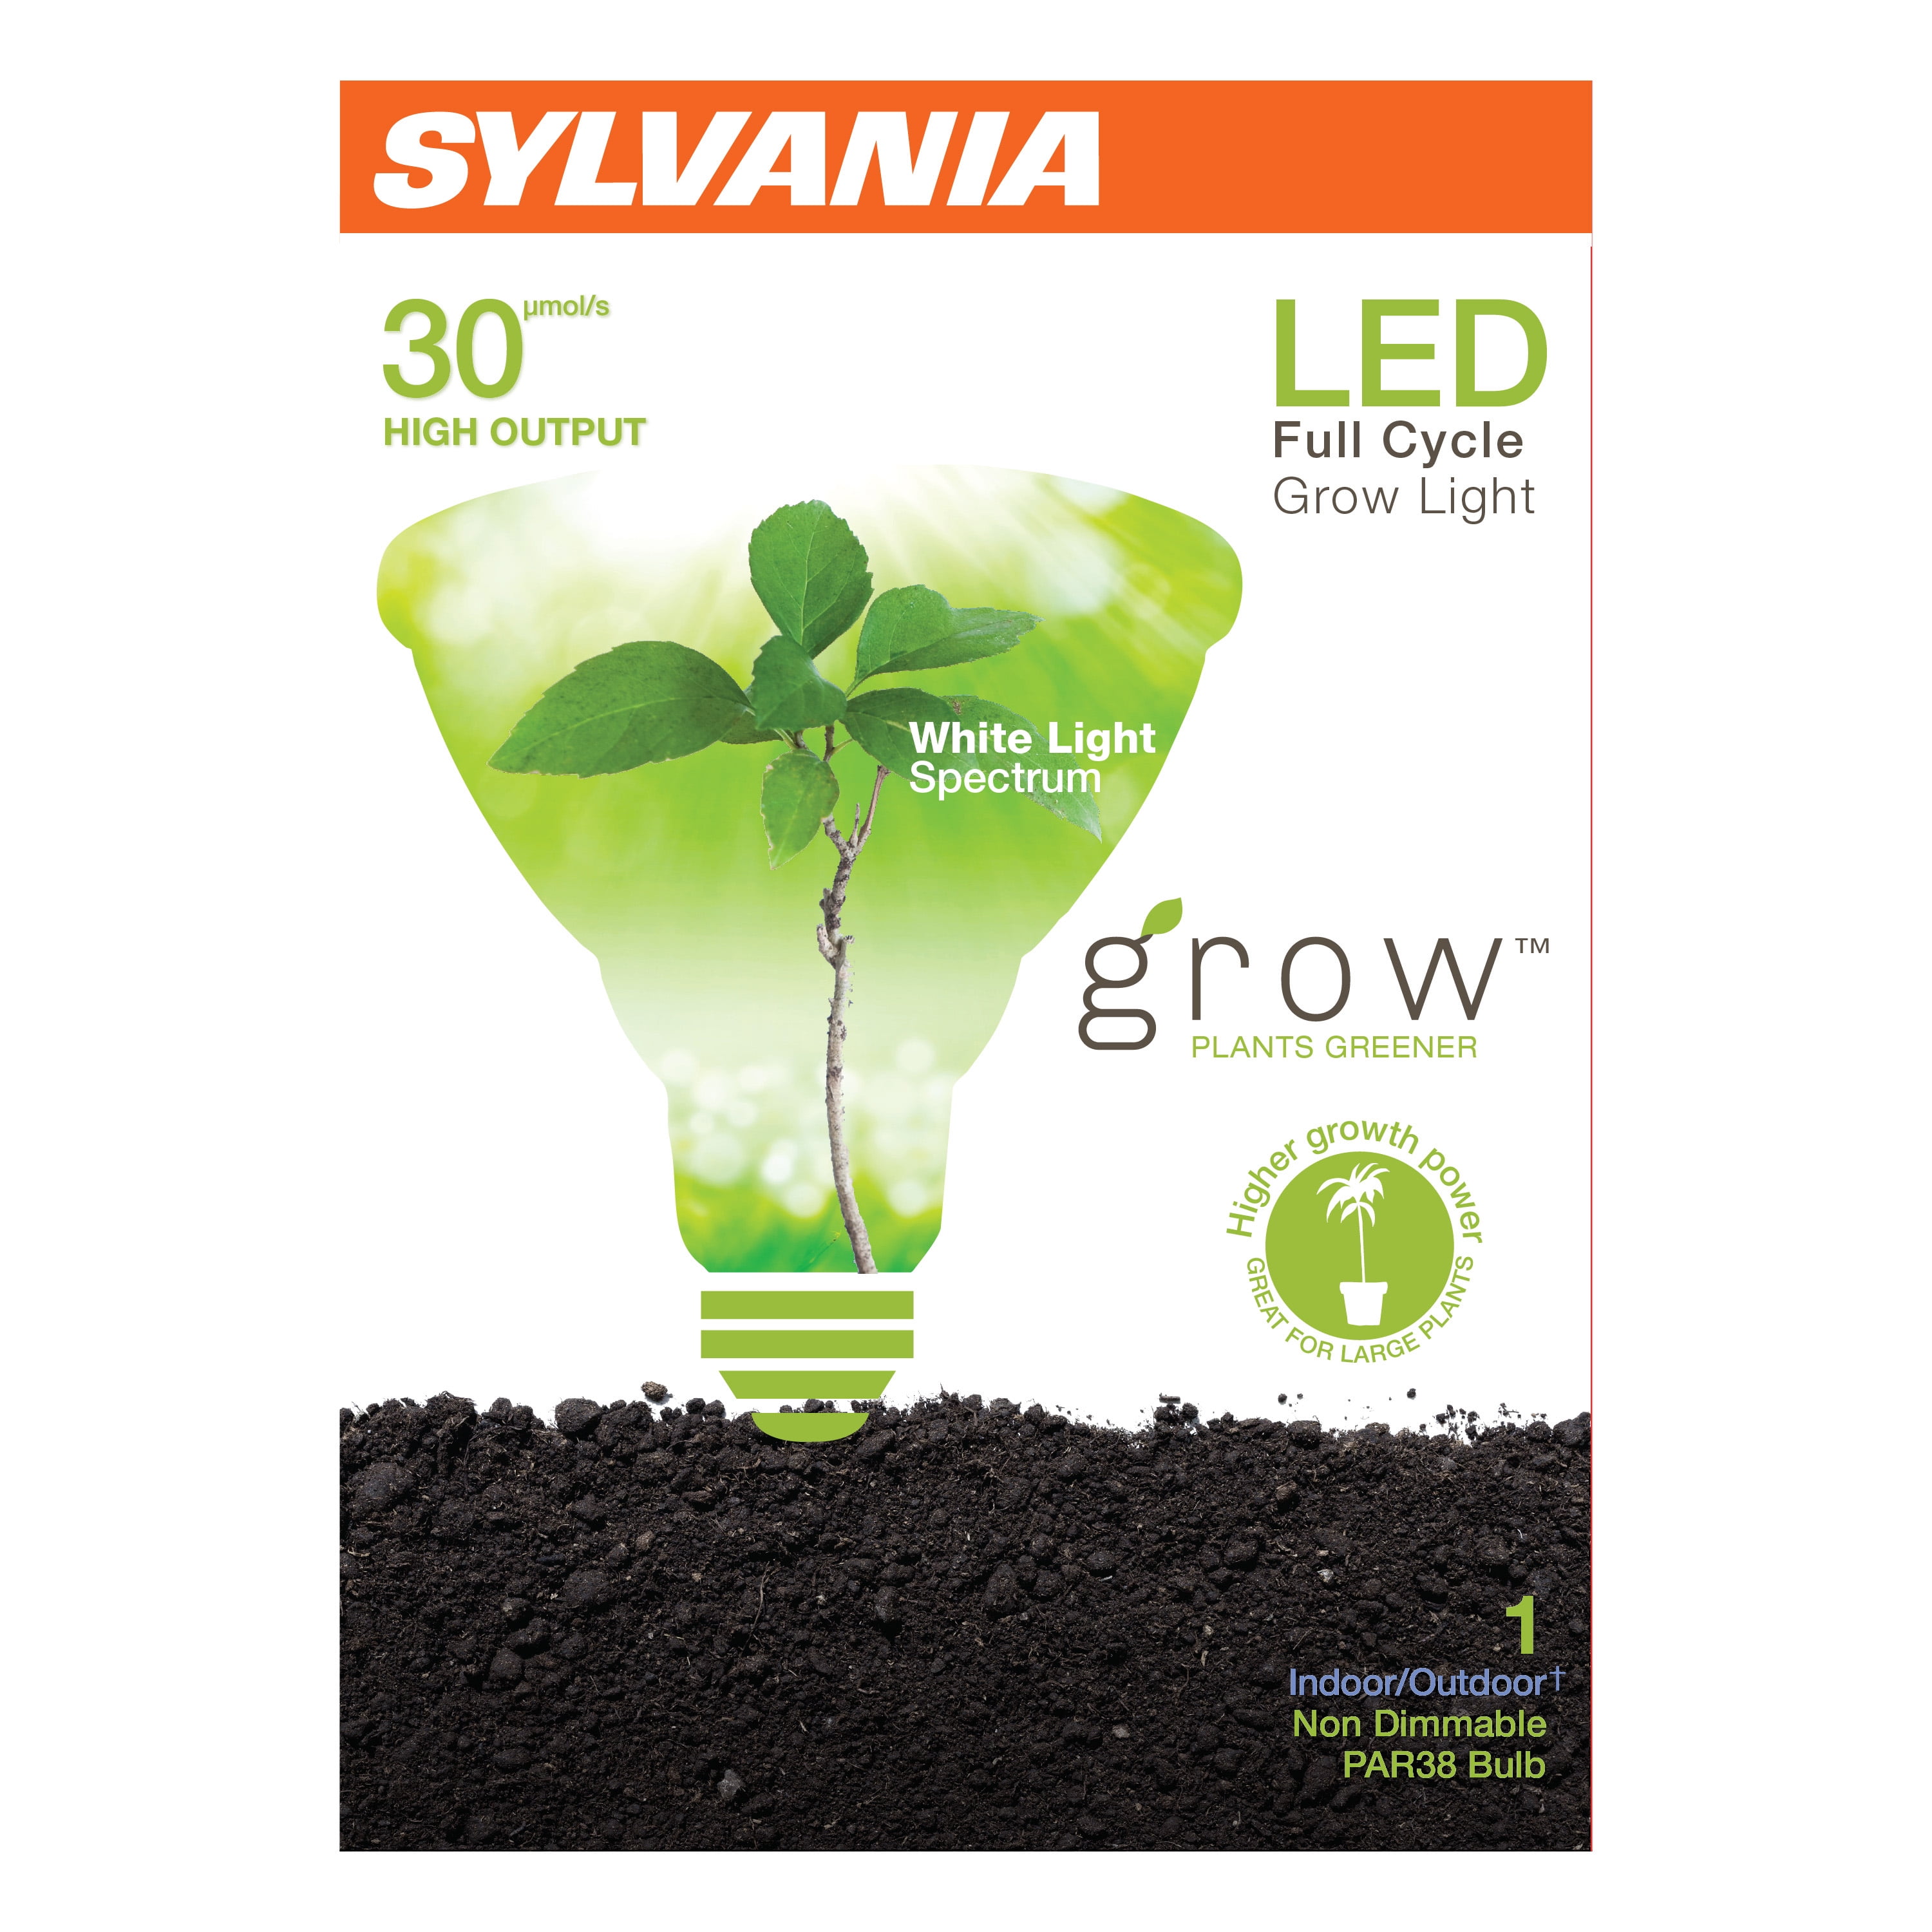 SYLVANIA PAR38 LED Grow Light Bulb, 20-Watt, Full Cycle White Spectrum Light for Indoor Plants and Seeds, High Output 30 Micromoles, 13 Year